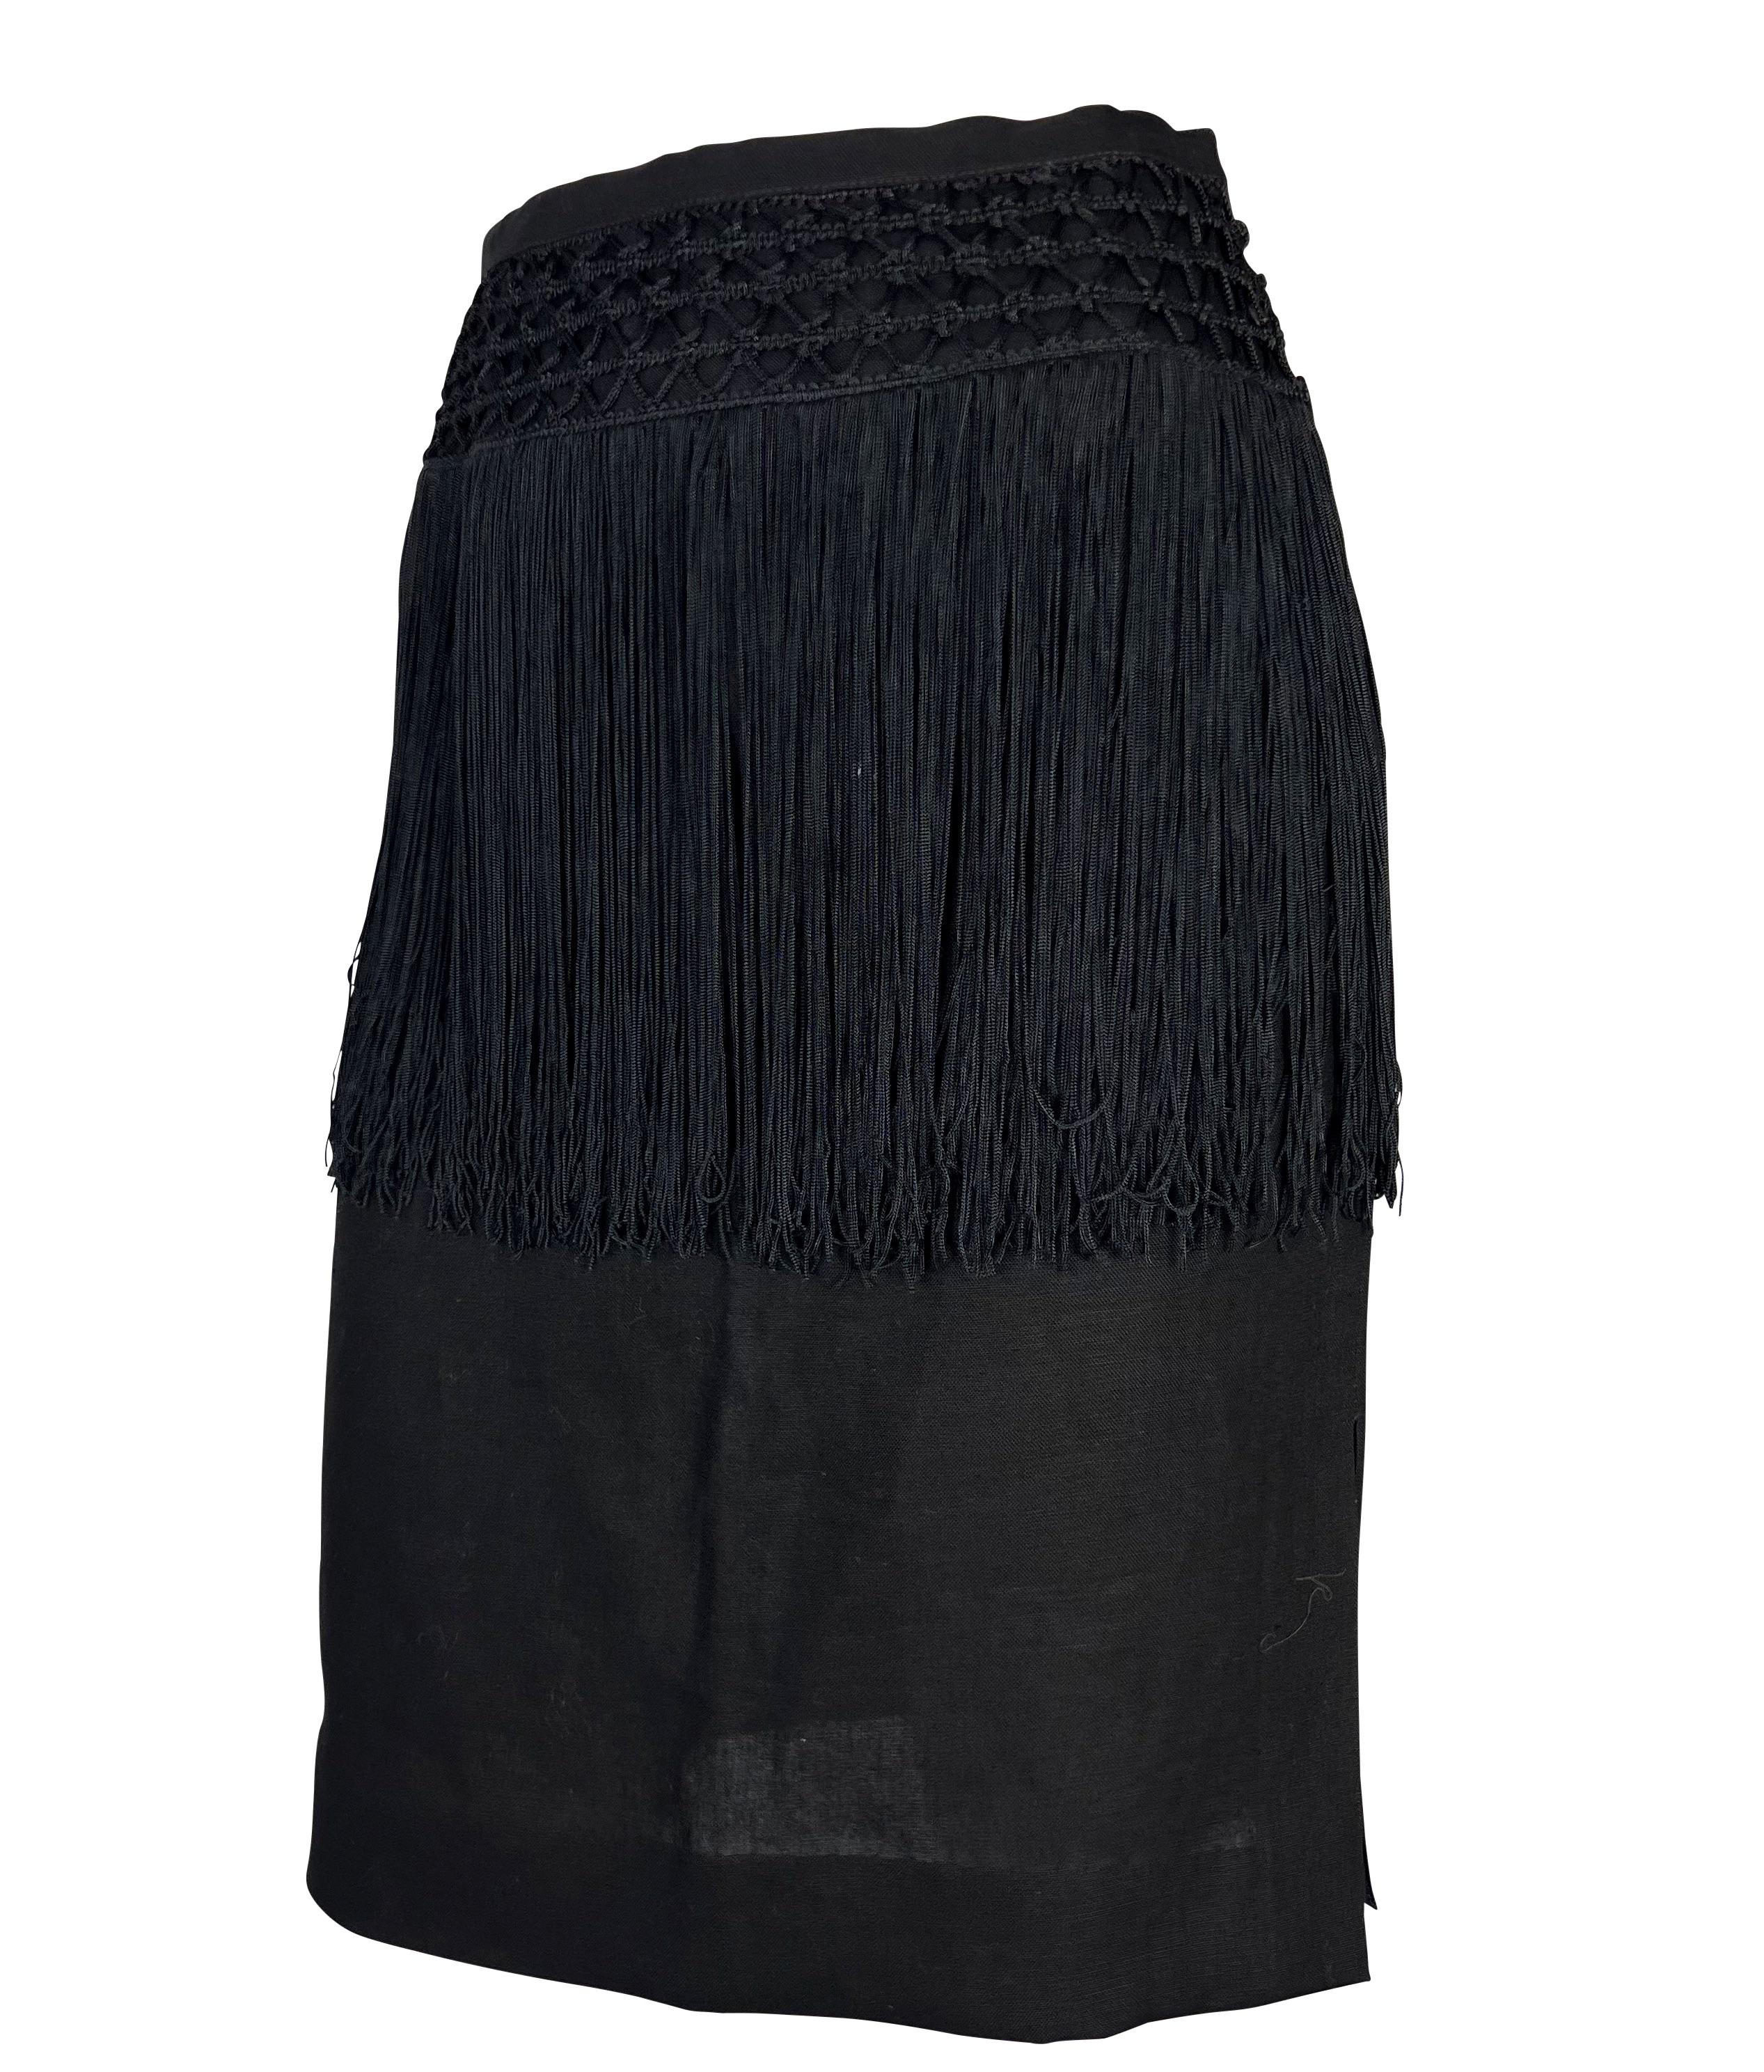 Presenting a black fringe-trimmed skirt designed by Valentino Garavani in the late 1980s or early 1990s. This piece is constructed in light, semi-sheer linen with a knit accent at the waist. Long fringe trim beautifully captures movement. Check out